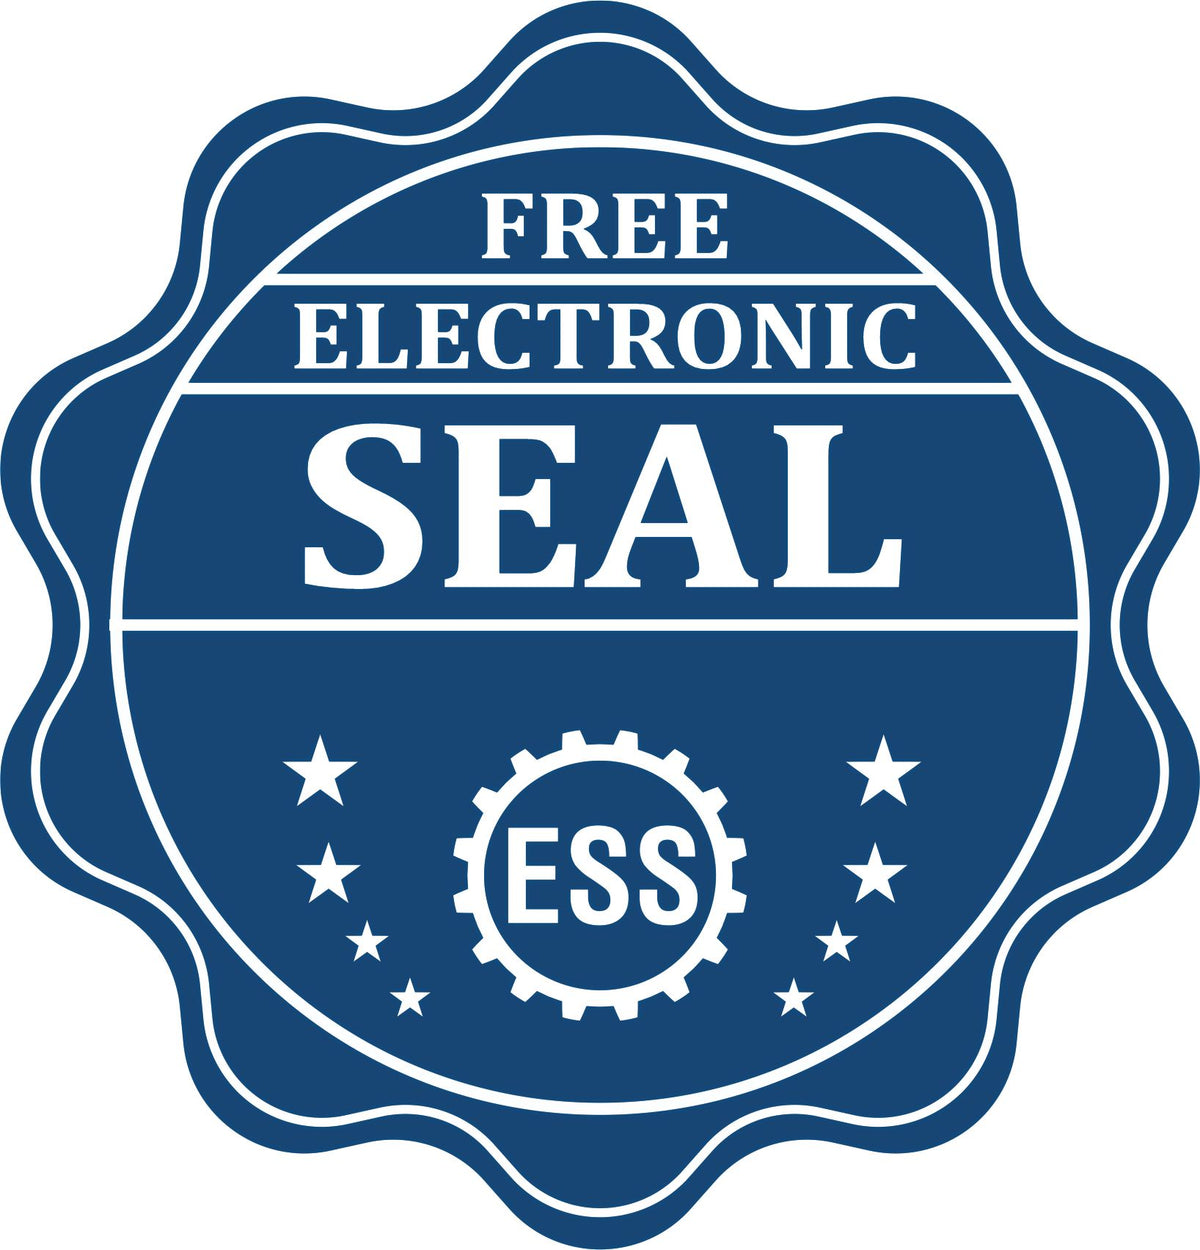 A badge showing a free electronic seal for the Handheld Tennessee Architect Seal Embosser with stars and the ESS gear on the emblem.